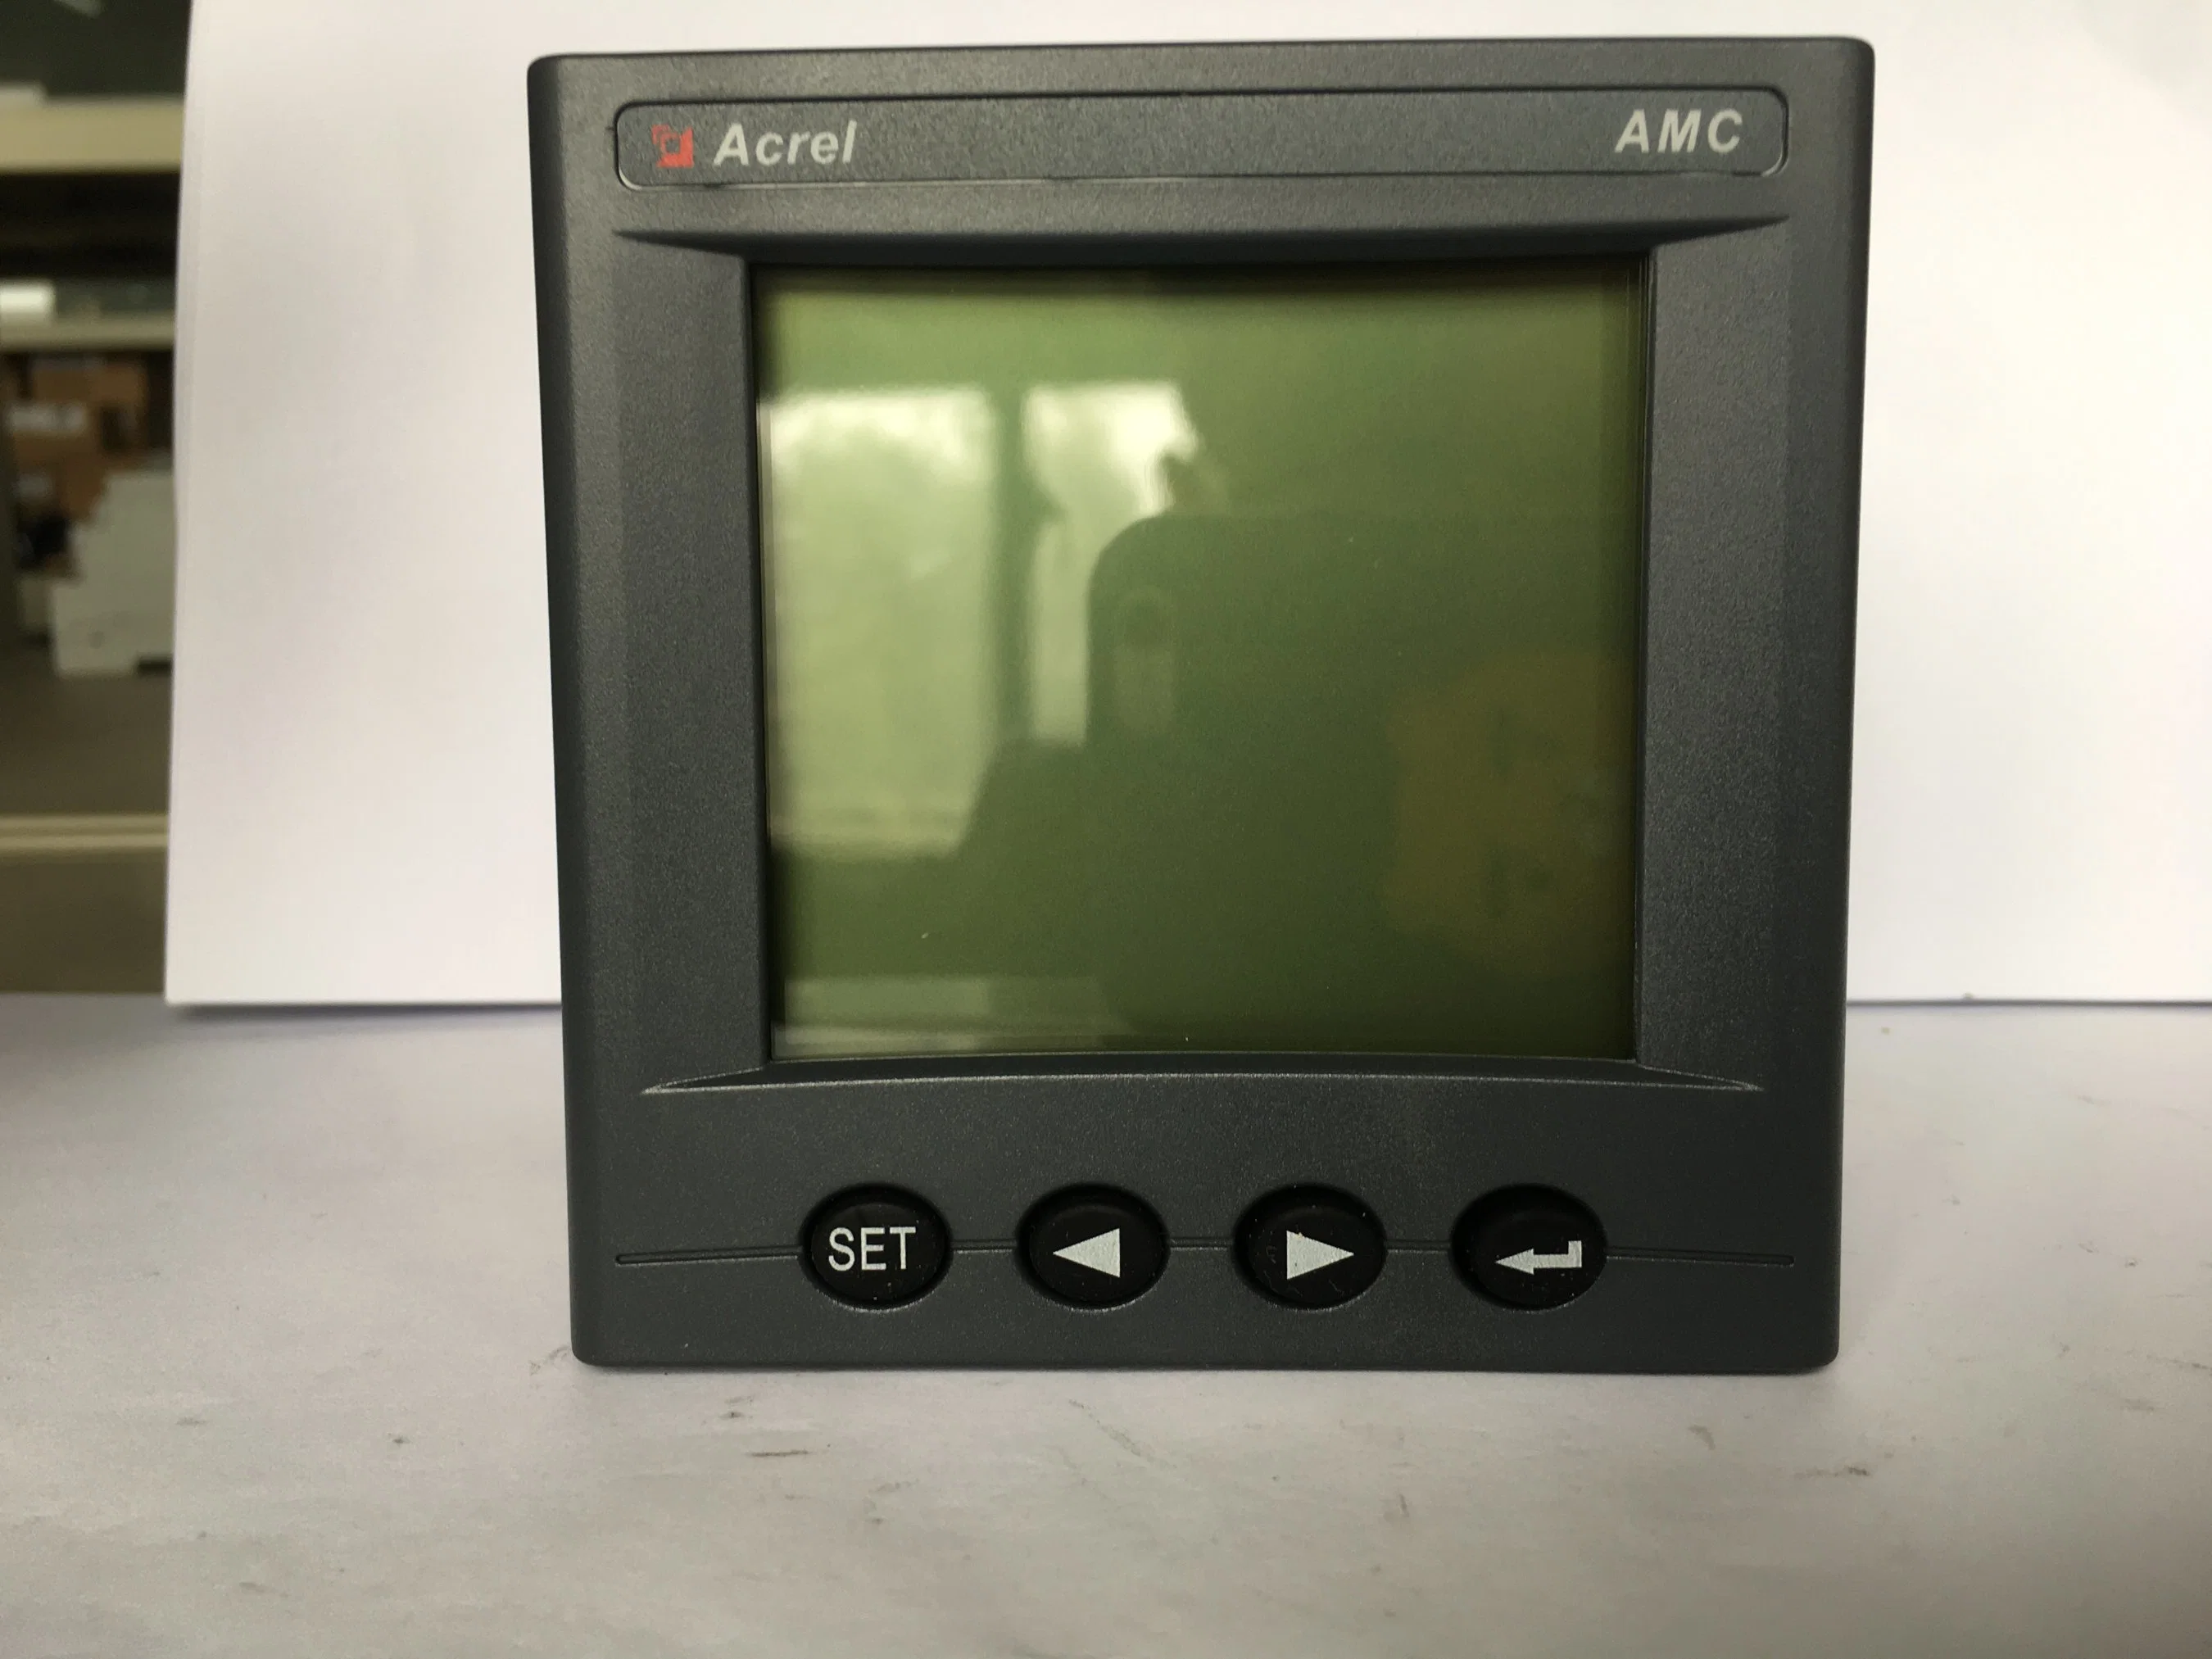 Amc96L-E4kc Smart Intelligent Power Collection and Monitoring Device with LCD Display